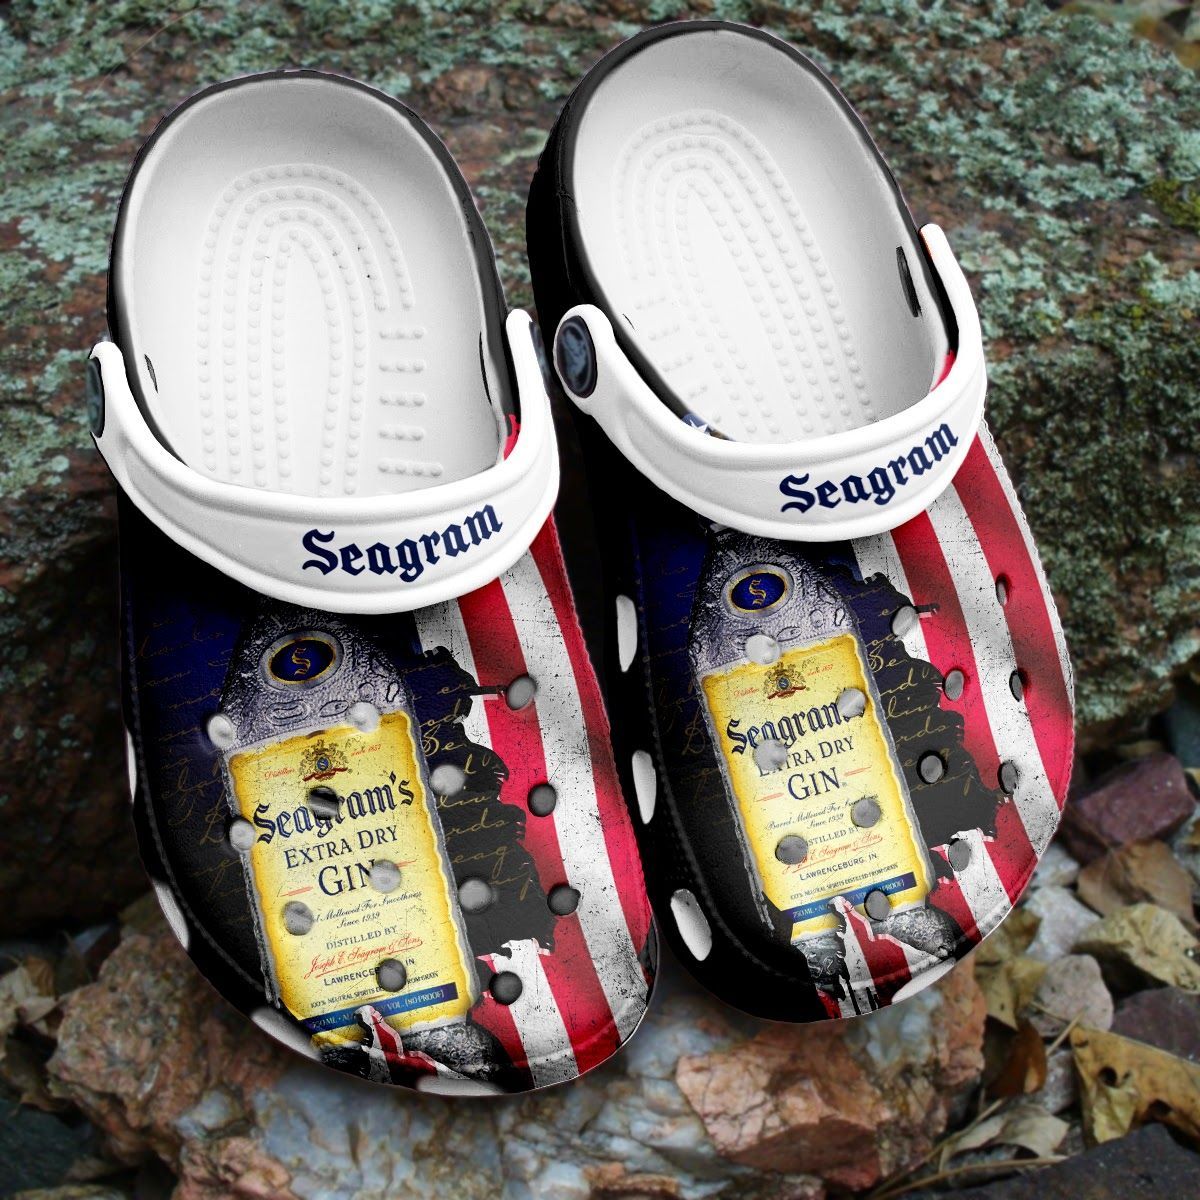 If you'd like to purchase a pair of Crocband Clogs, be sure to check out the official website. 126